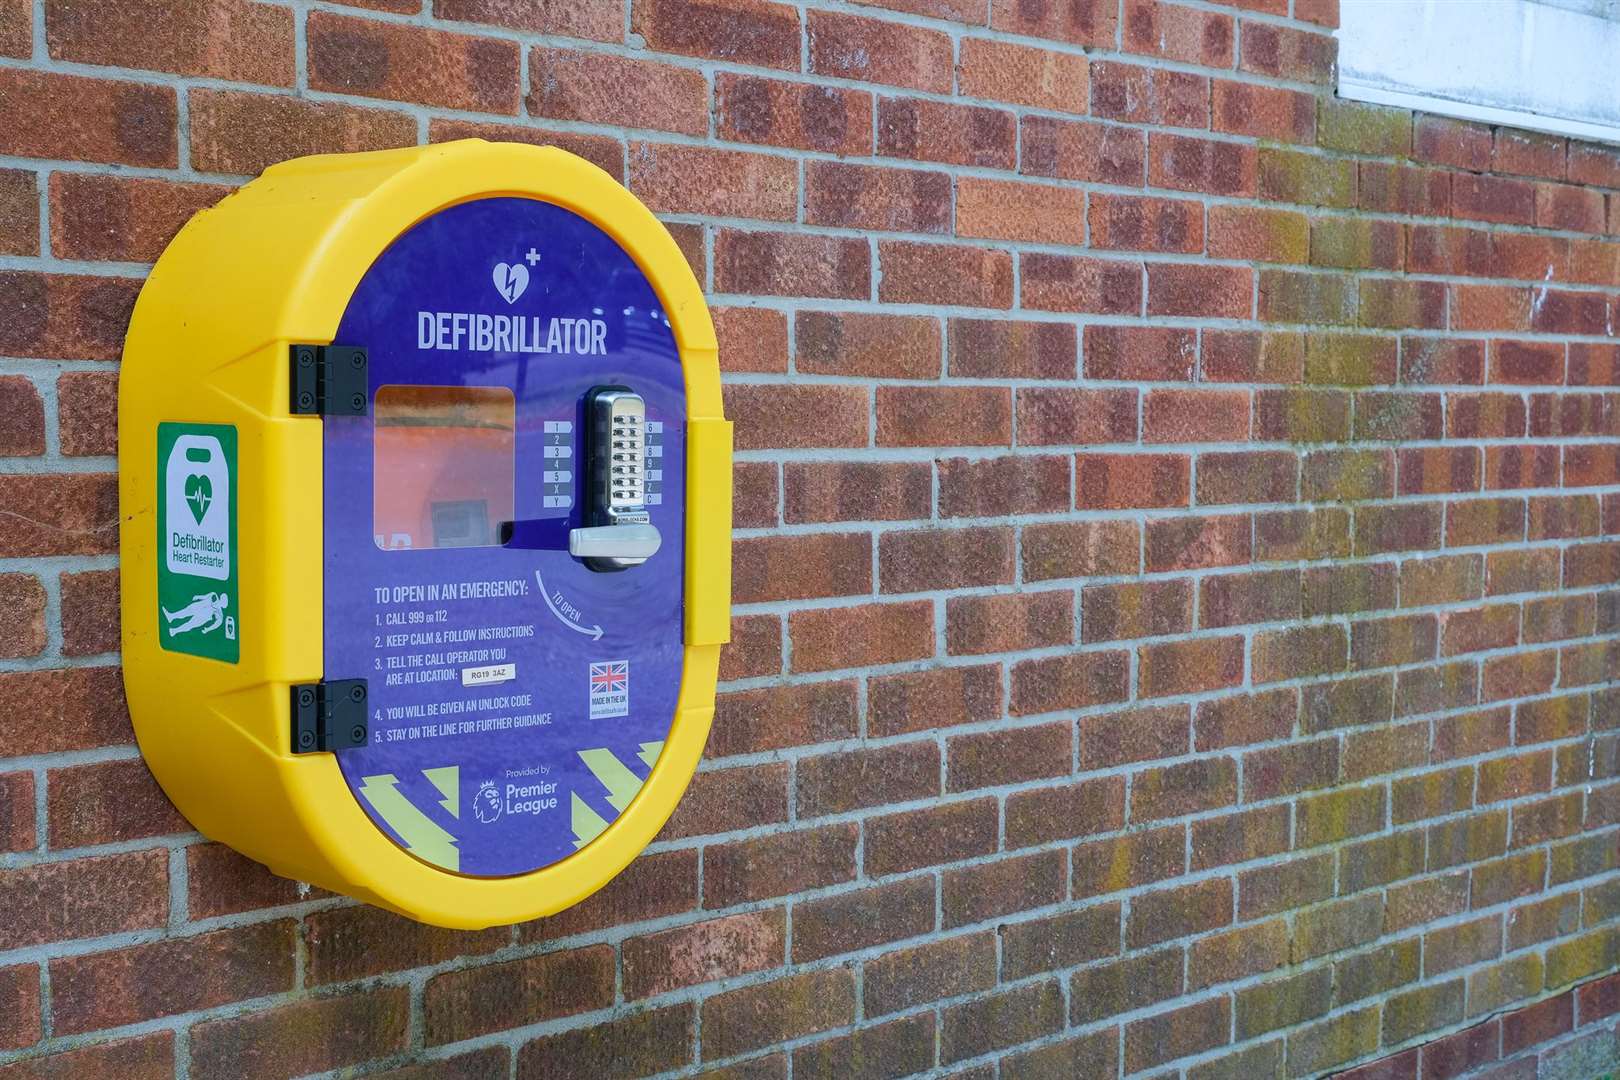 All state-funded schools in England should have a defibrillator by next summer under government plans